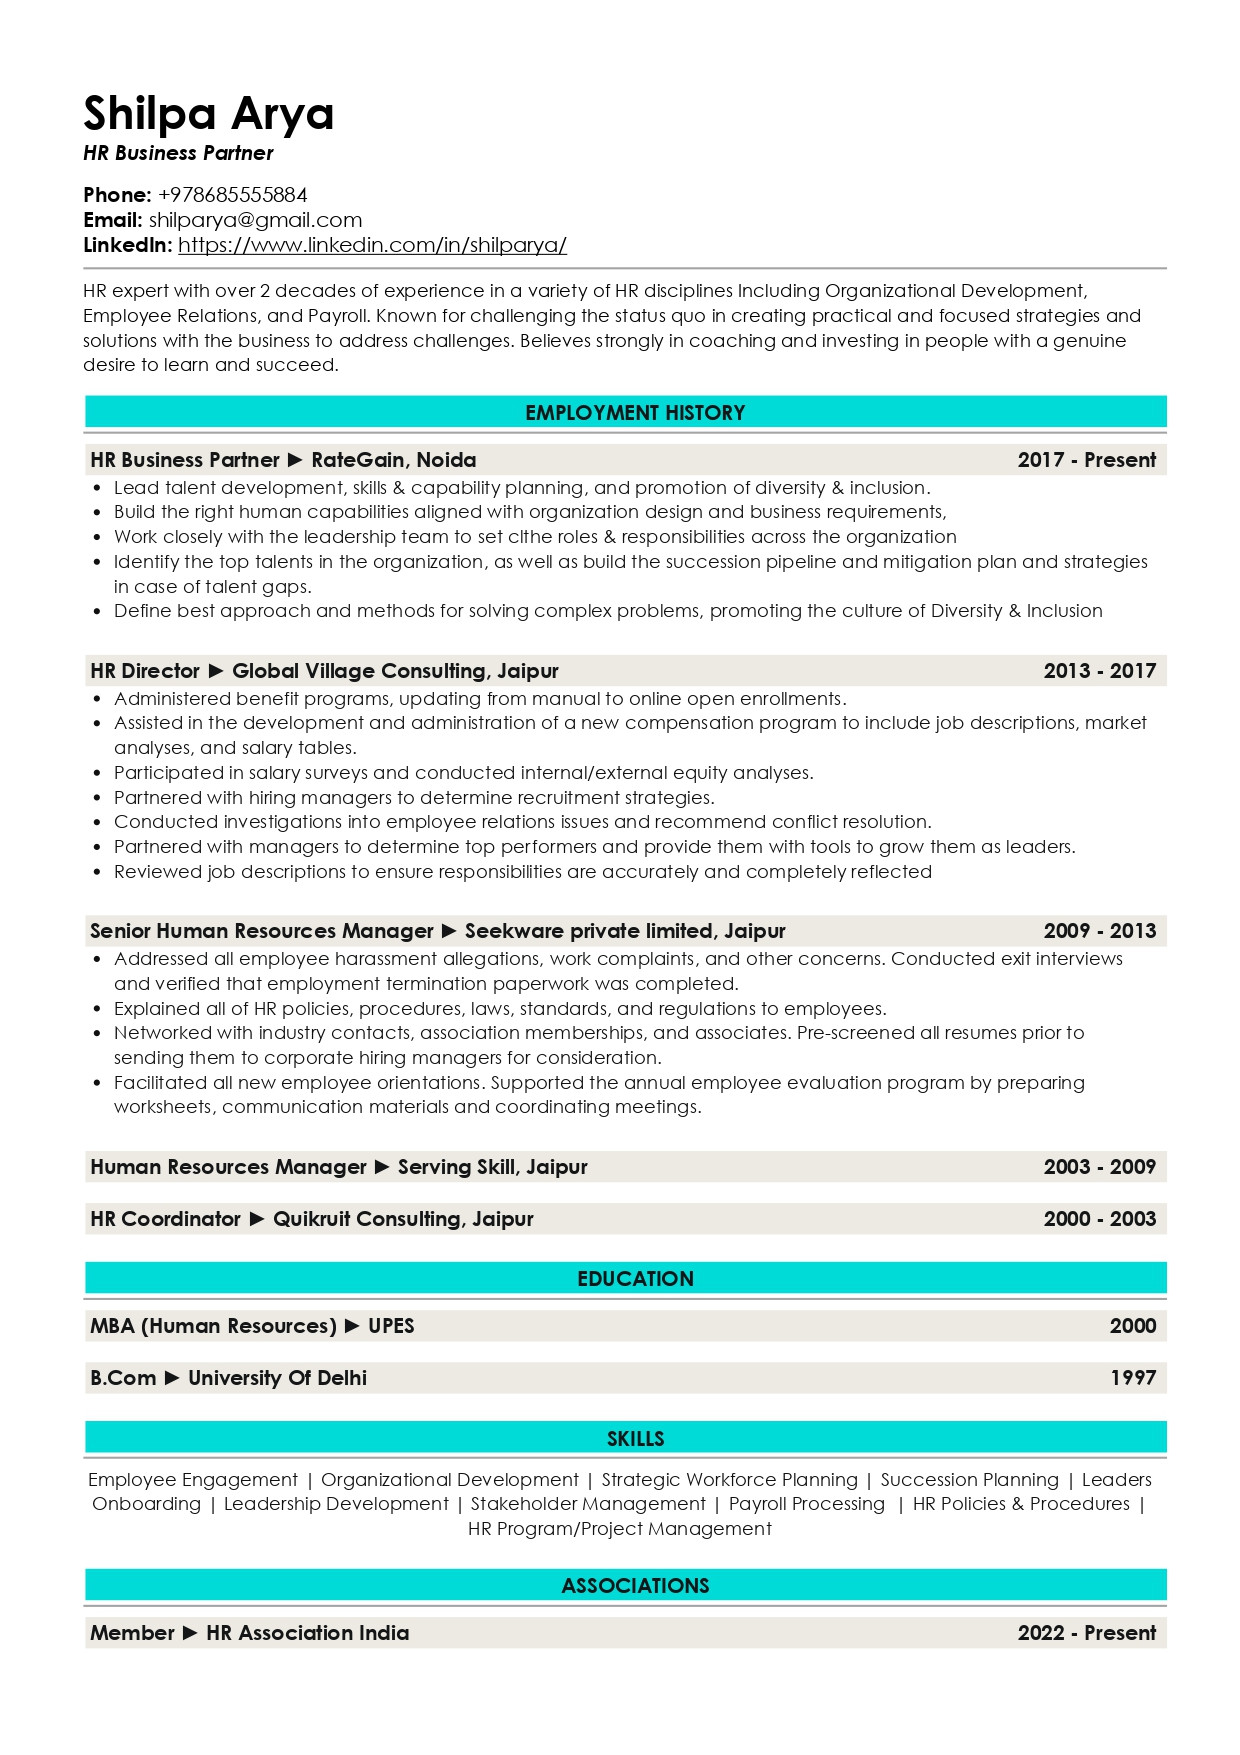 Sample Hr Resume with Union Experience Sample Resume Of Hr Business Partner (hrbp) with Template …